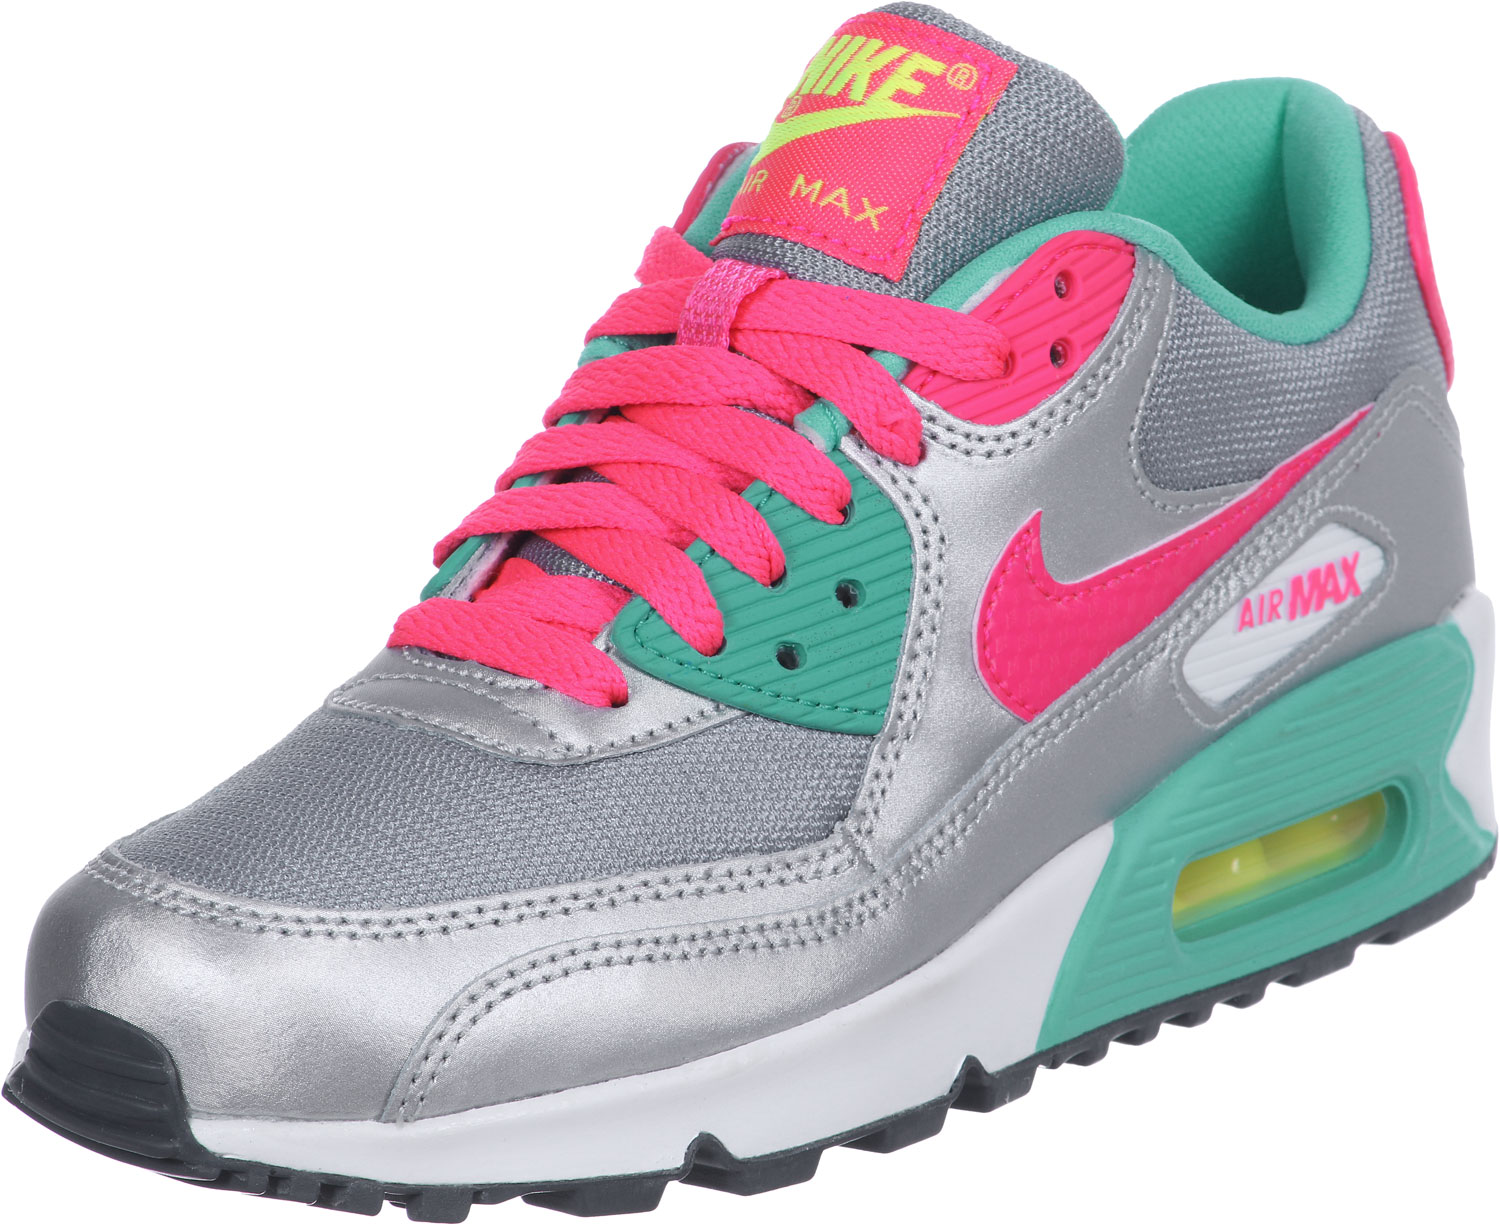 nike air max 90 youth gs chaussures noir argent, Mystique Nike Air Max 90 Youth GS Chaussures Argent turquoise Rose A2o537693 opération une plus grande image